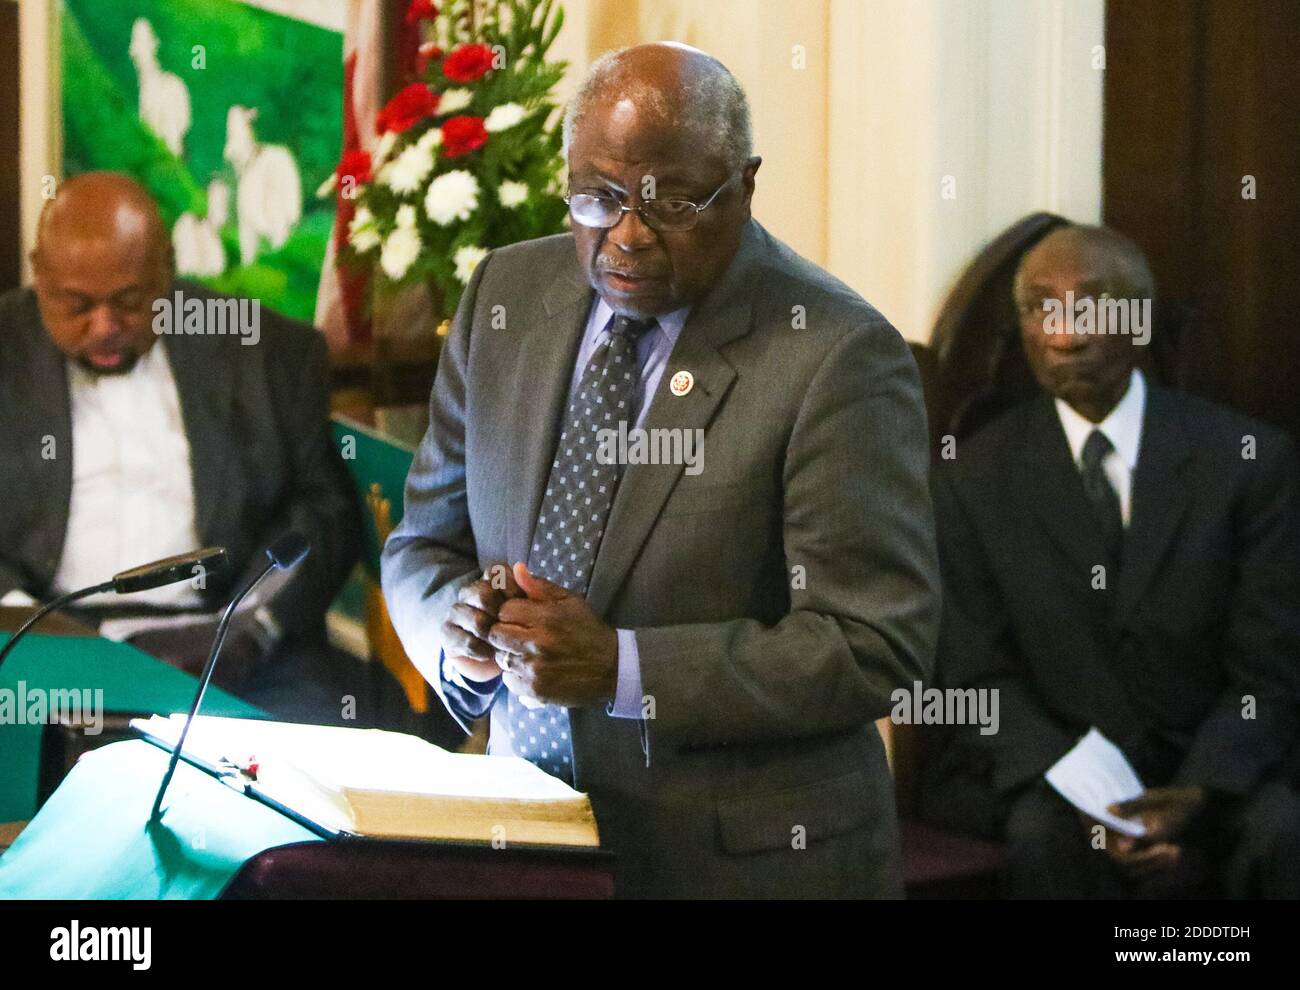 NO FILM, NO VIDEO, NO TV, NO DOCUMENTARY - US Congressman James Clyburn speaks at the prayer vigil that was held Thursday, June 18, 2015 at Morris Brown AME Church for the nine people who were killed by a gunman in Emanuel AME Church in Charleston, SC, USA. Photo by Tim Dominick/The State/TNS/ABACAPRESS.COM Stock Photo